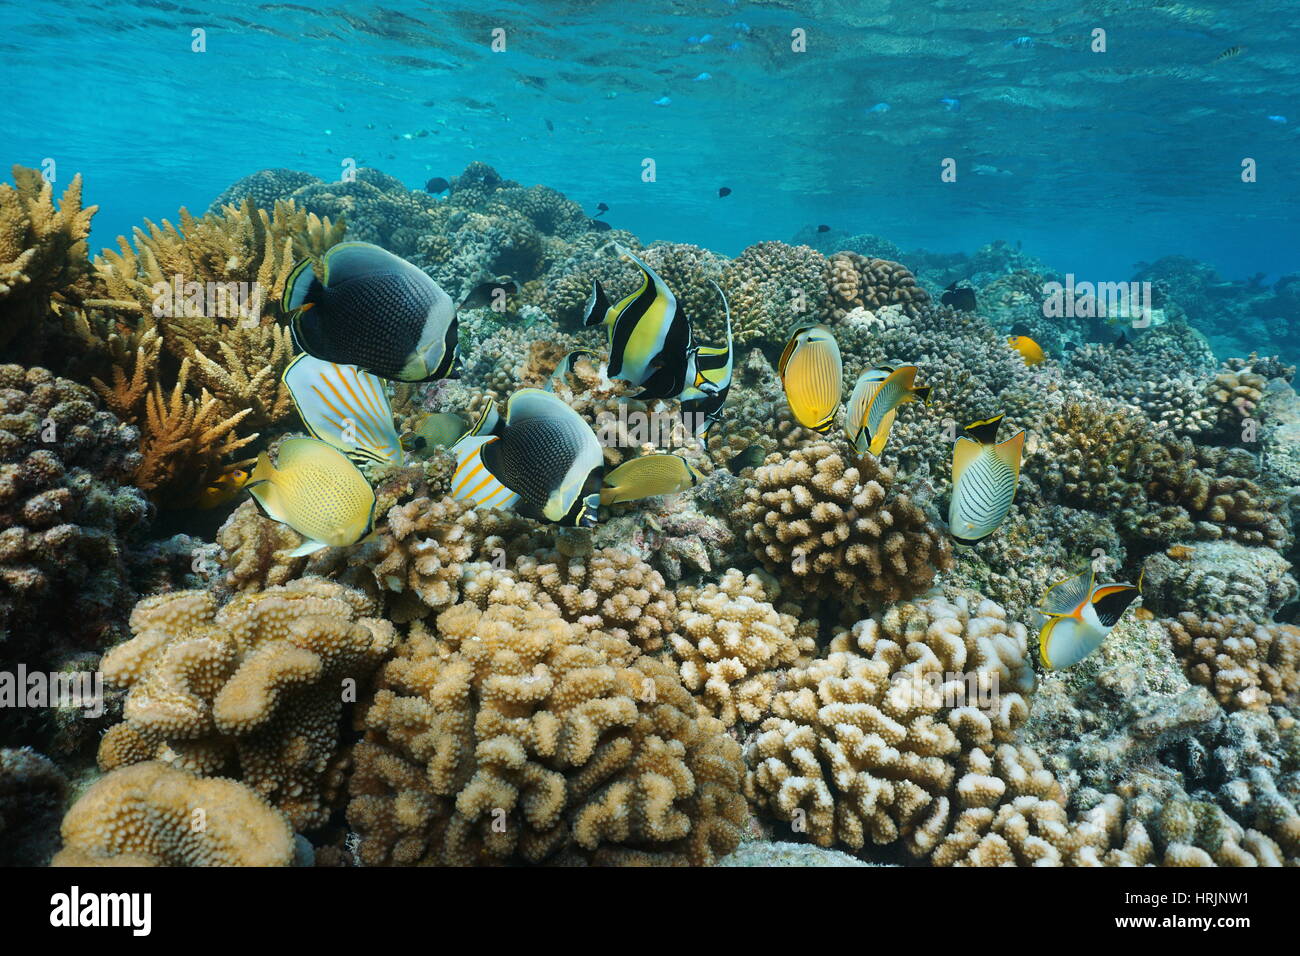 Colorful tropical fish underwater on a coral reef, natural scene, lagoon of Rangiroa, Tuamotu, Pacific ocean, French Polynesia Stock Photo